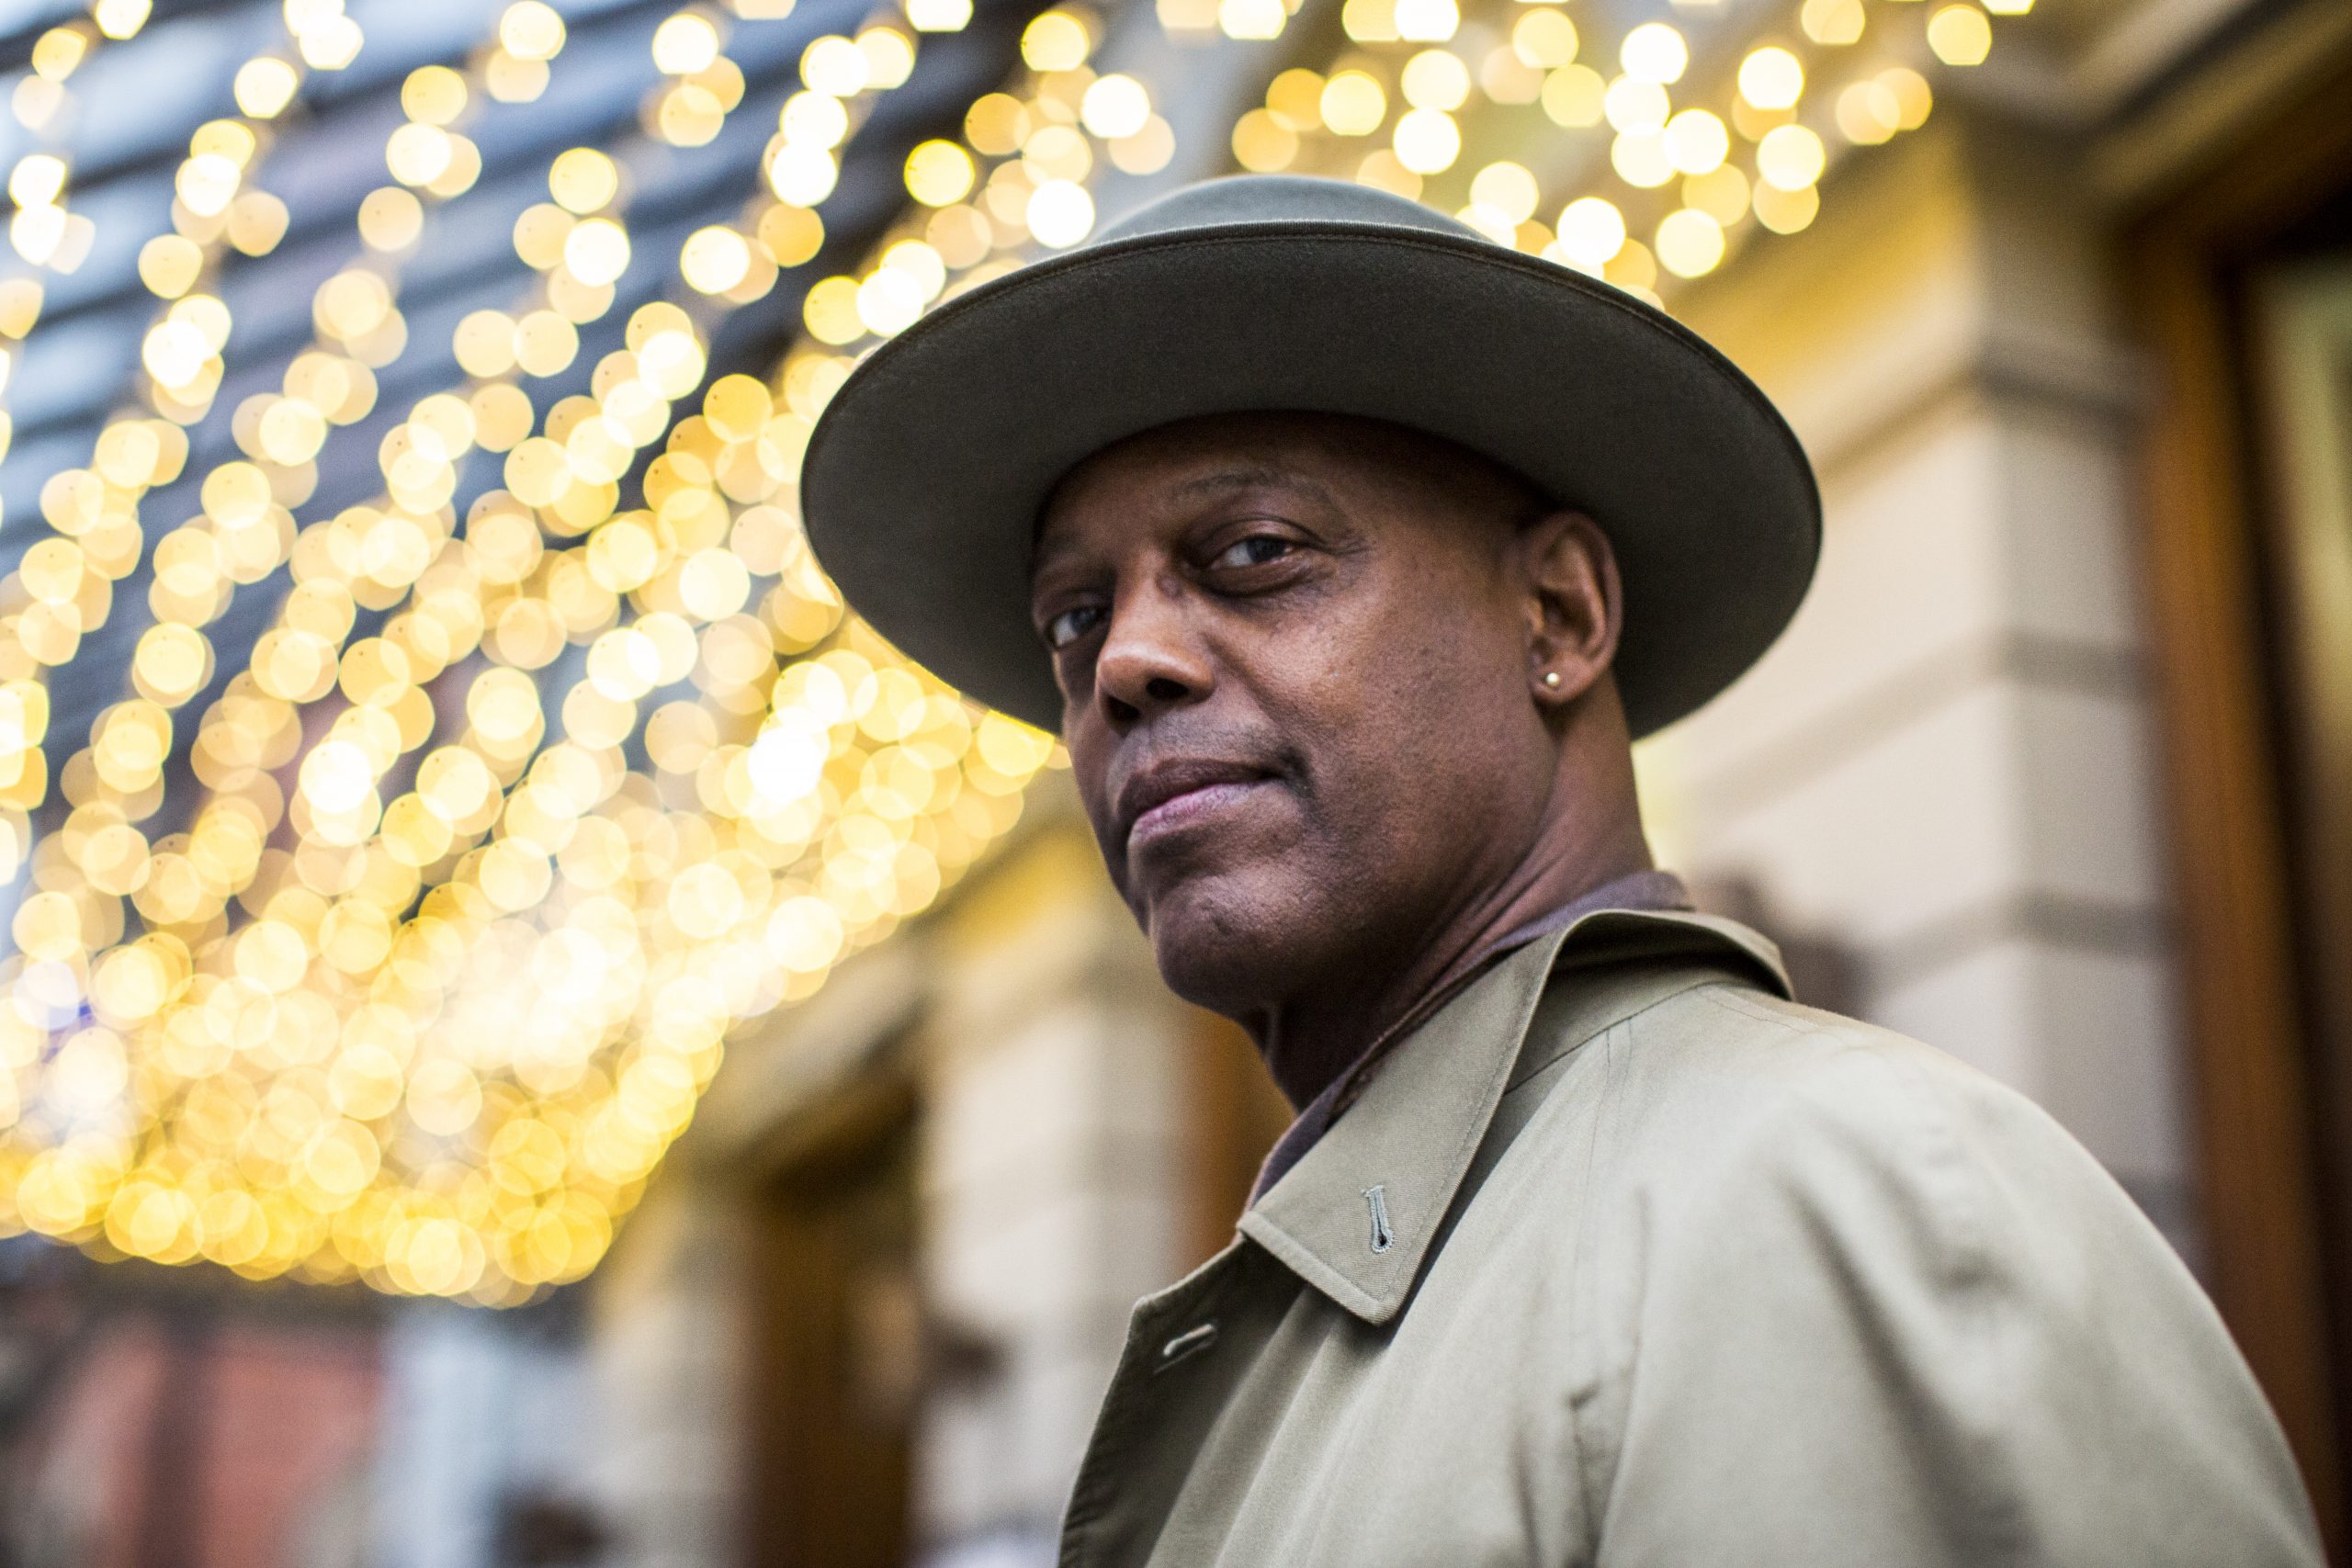 Eric Bibb looks looks down at the camera, he is wearing a hat and has fairy lights above him.